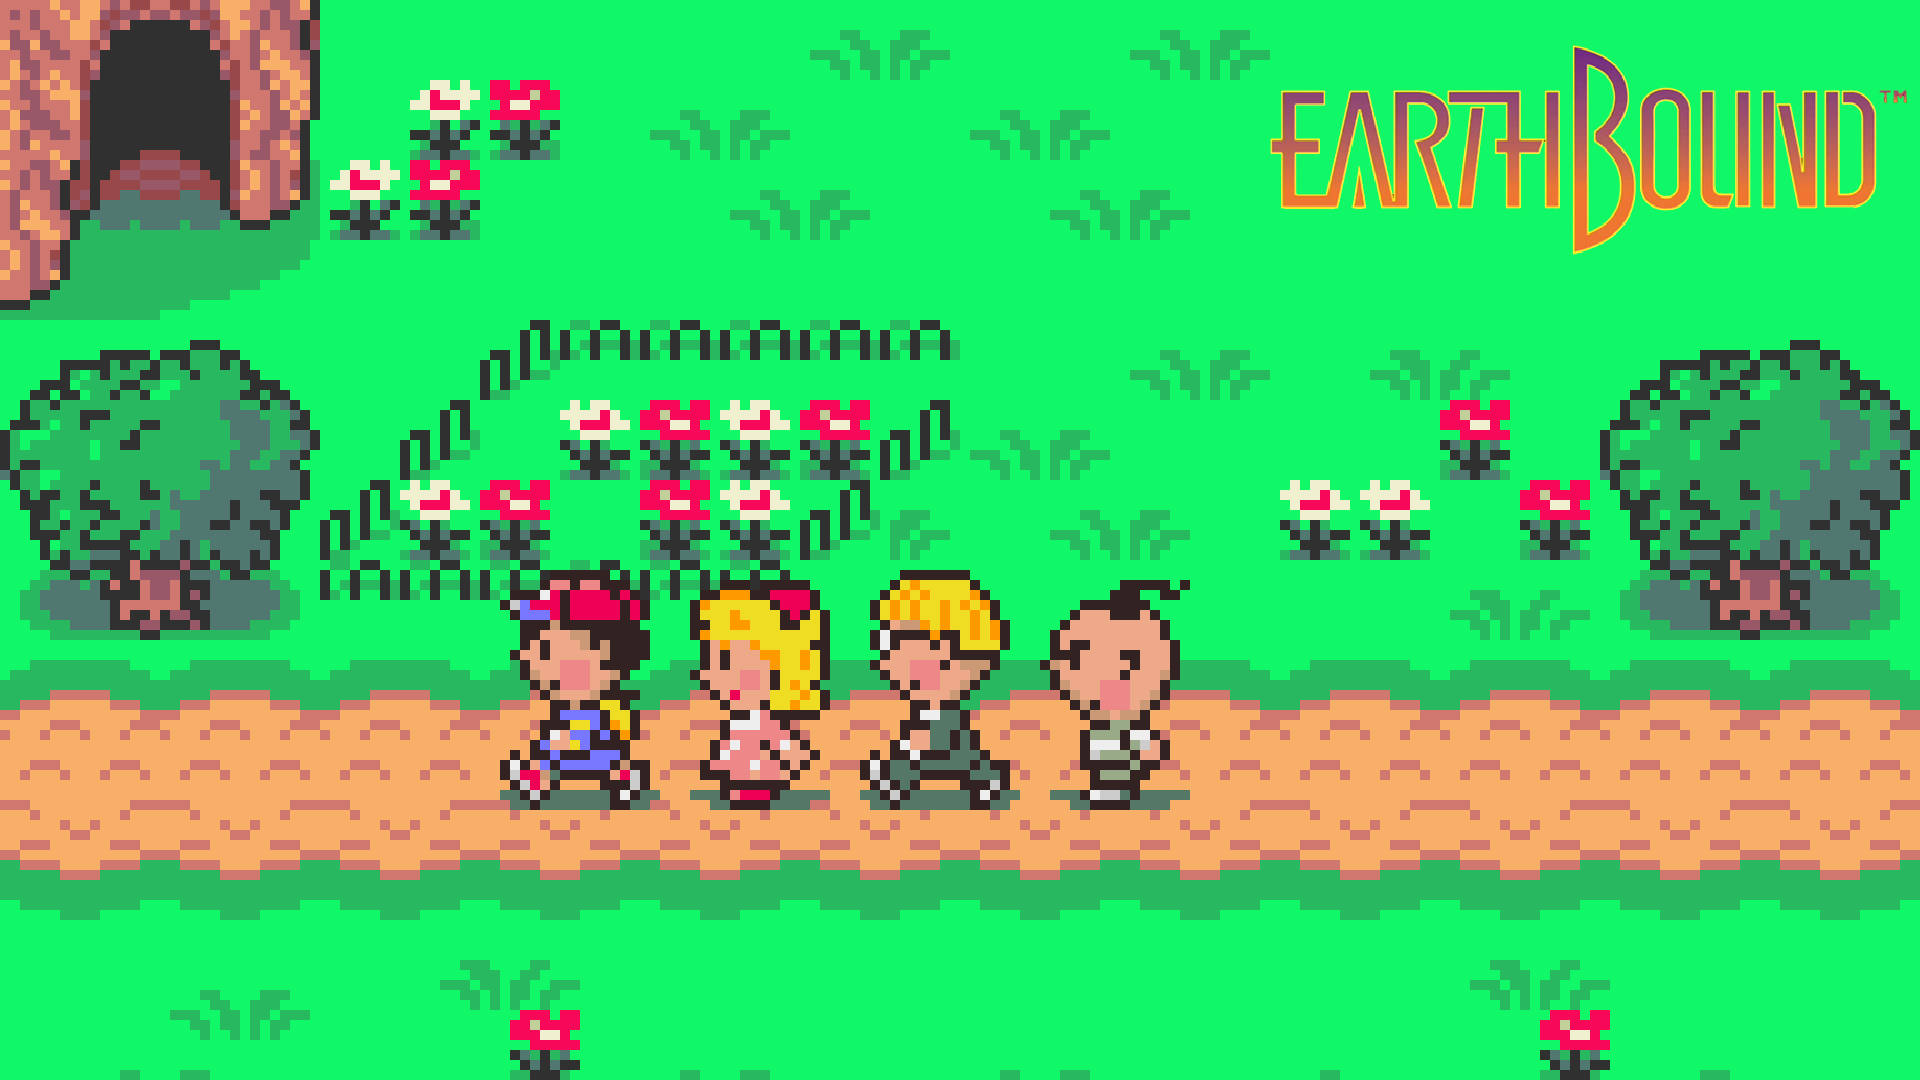 Strolling through the picturesque country in Earthbound Wallpaper